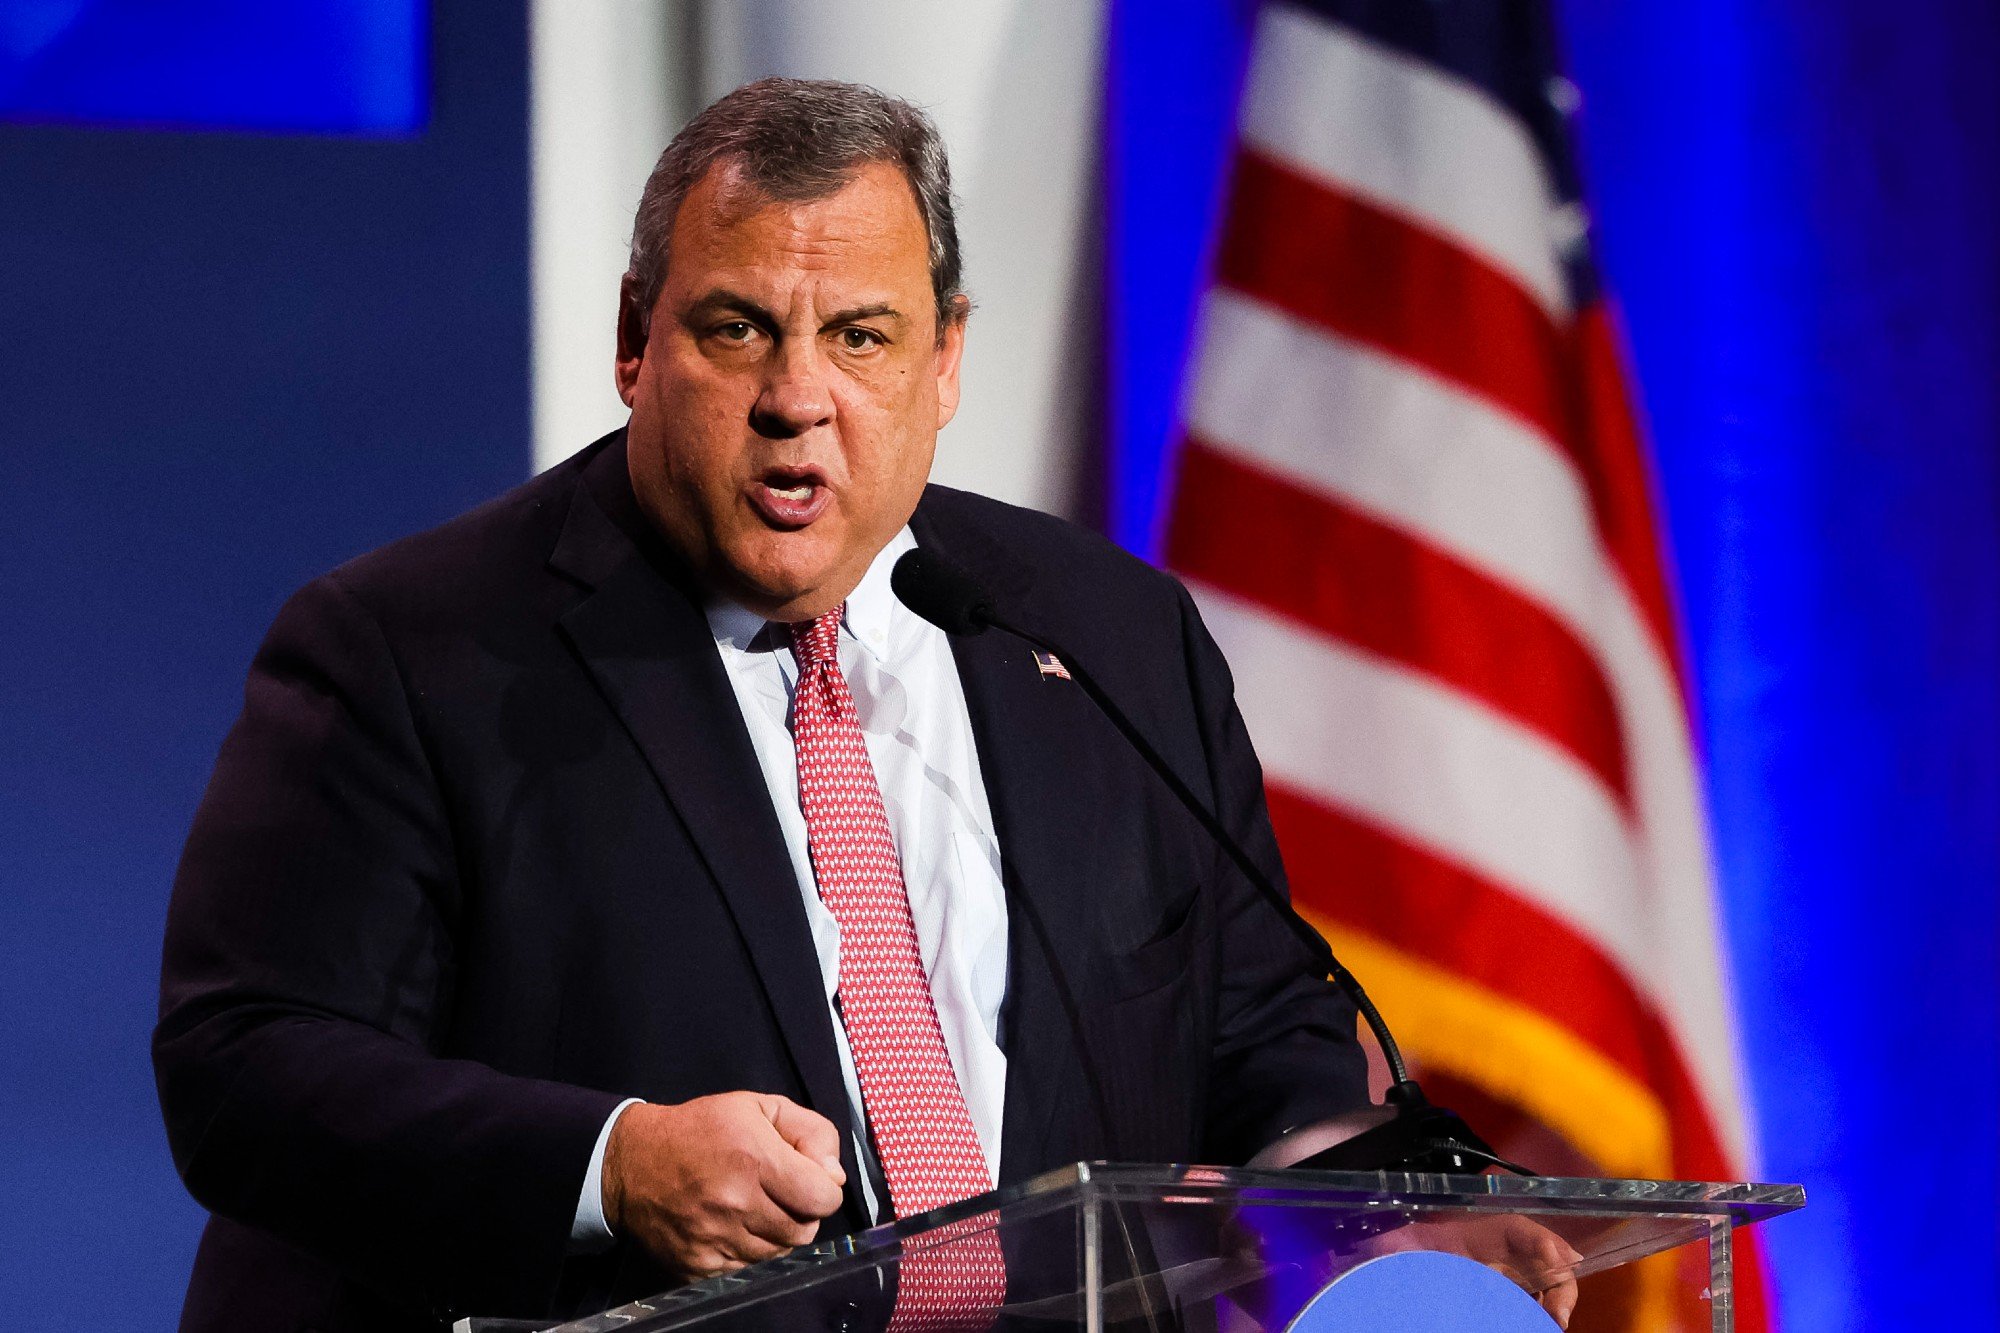 Chris Christie Enters Race to Take on Trump